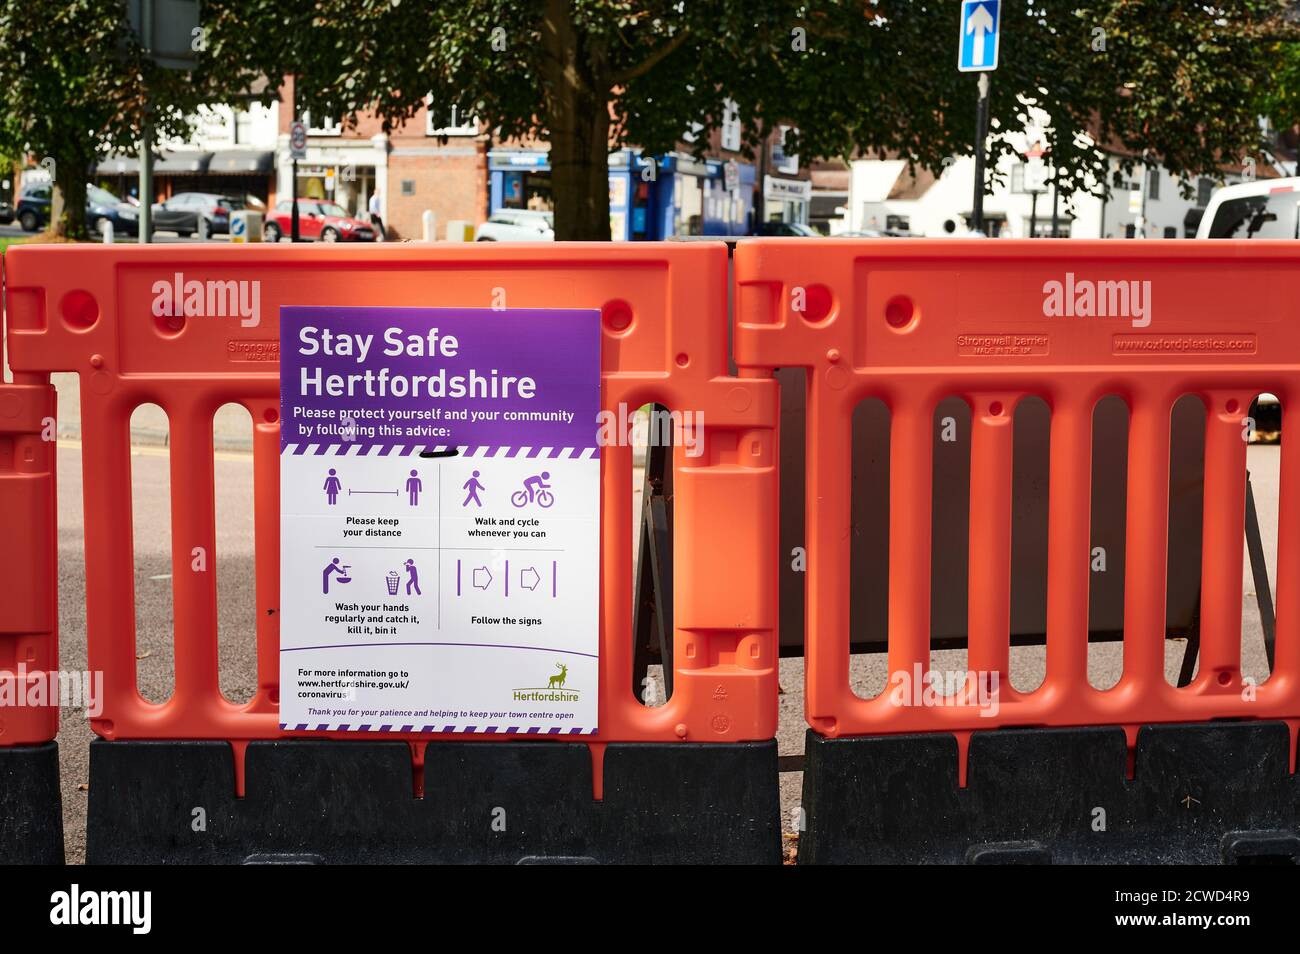 Covid-19 safety guidelines sign on the street in Harpenden United Kingdom Hertfordshire warning people to keep the safety guidelines Stock Photo